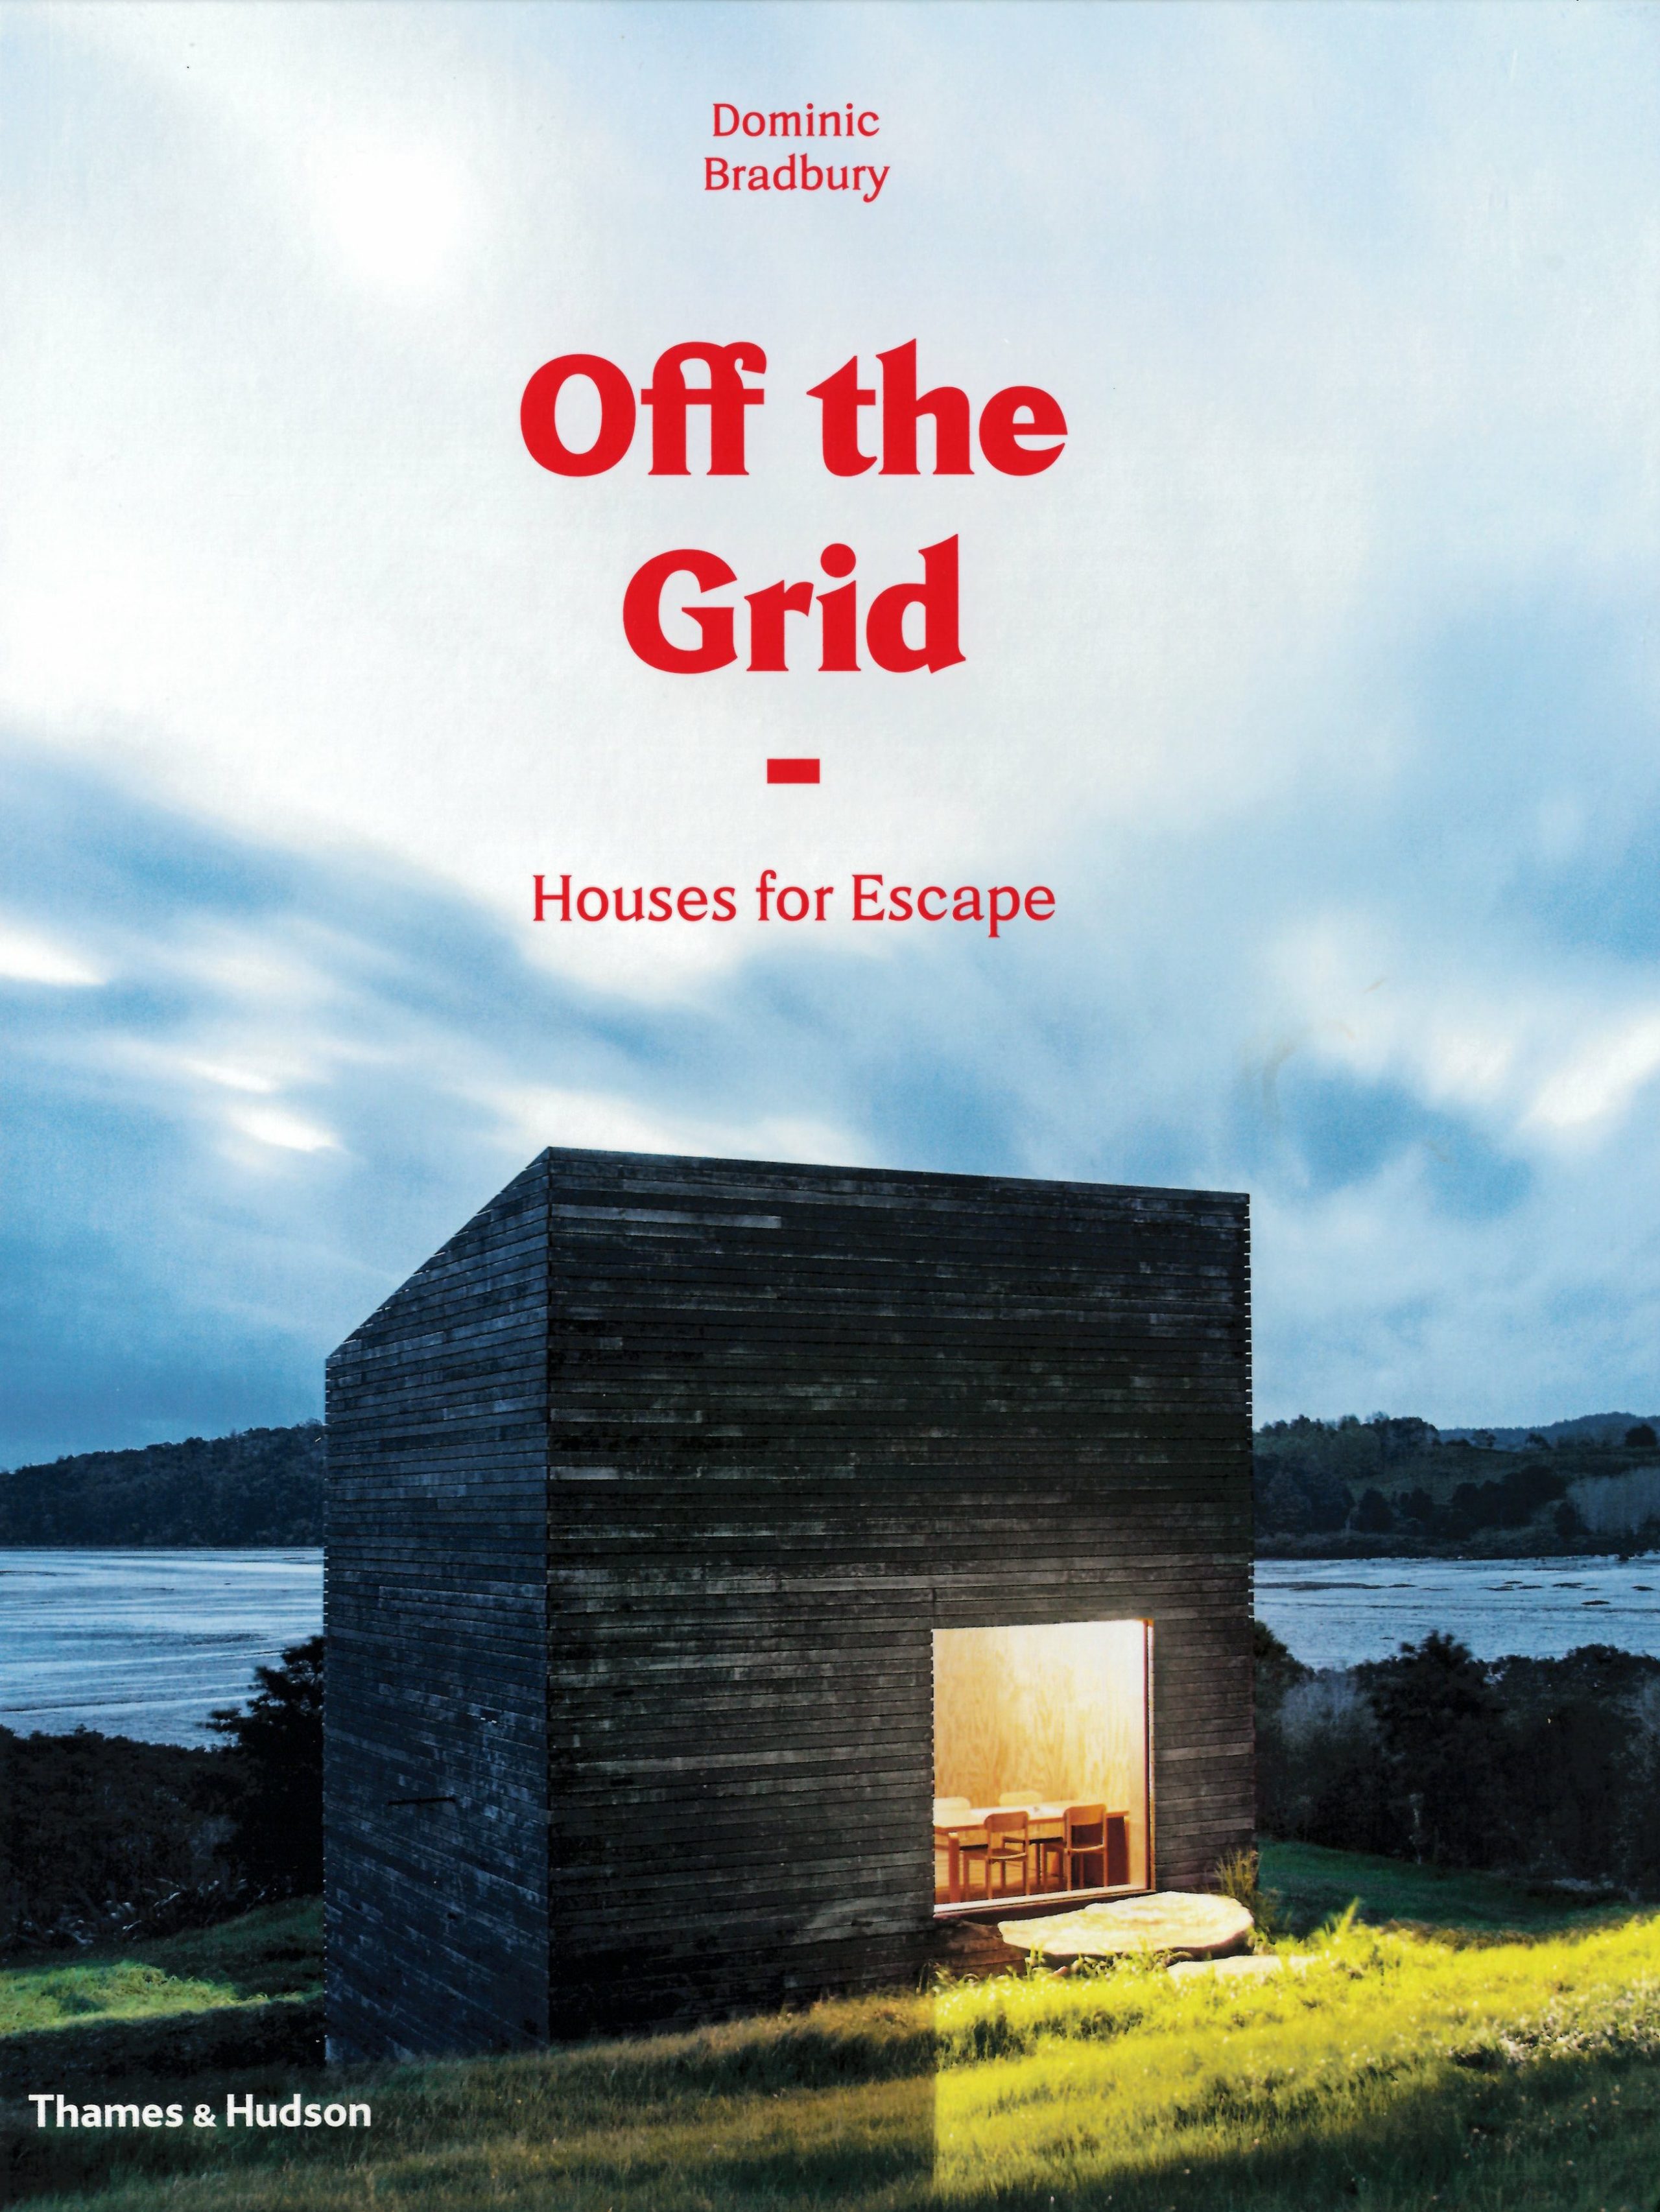 Off the Grid book by Thames & Hudson featuring Renée del Gaudio Architecture. 